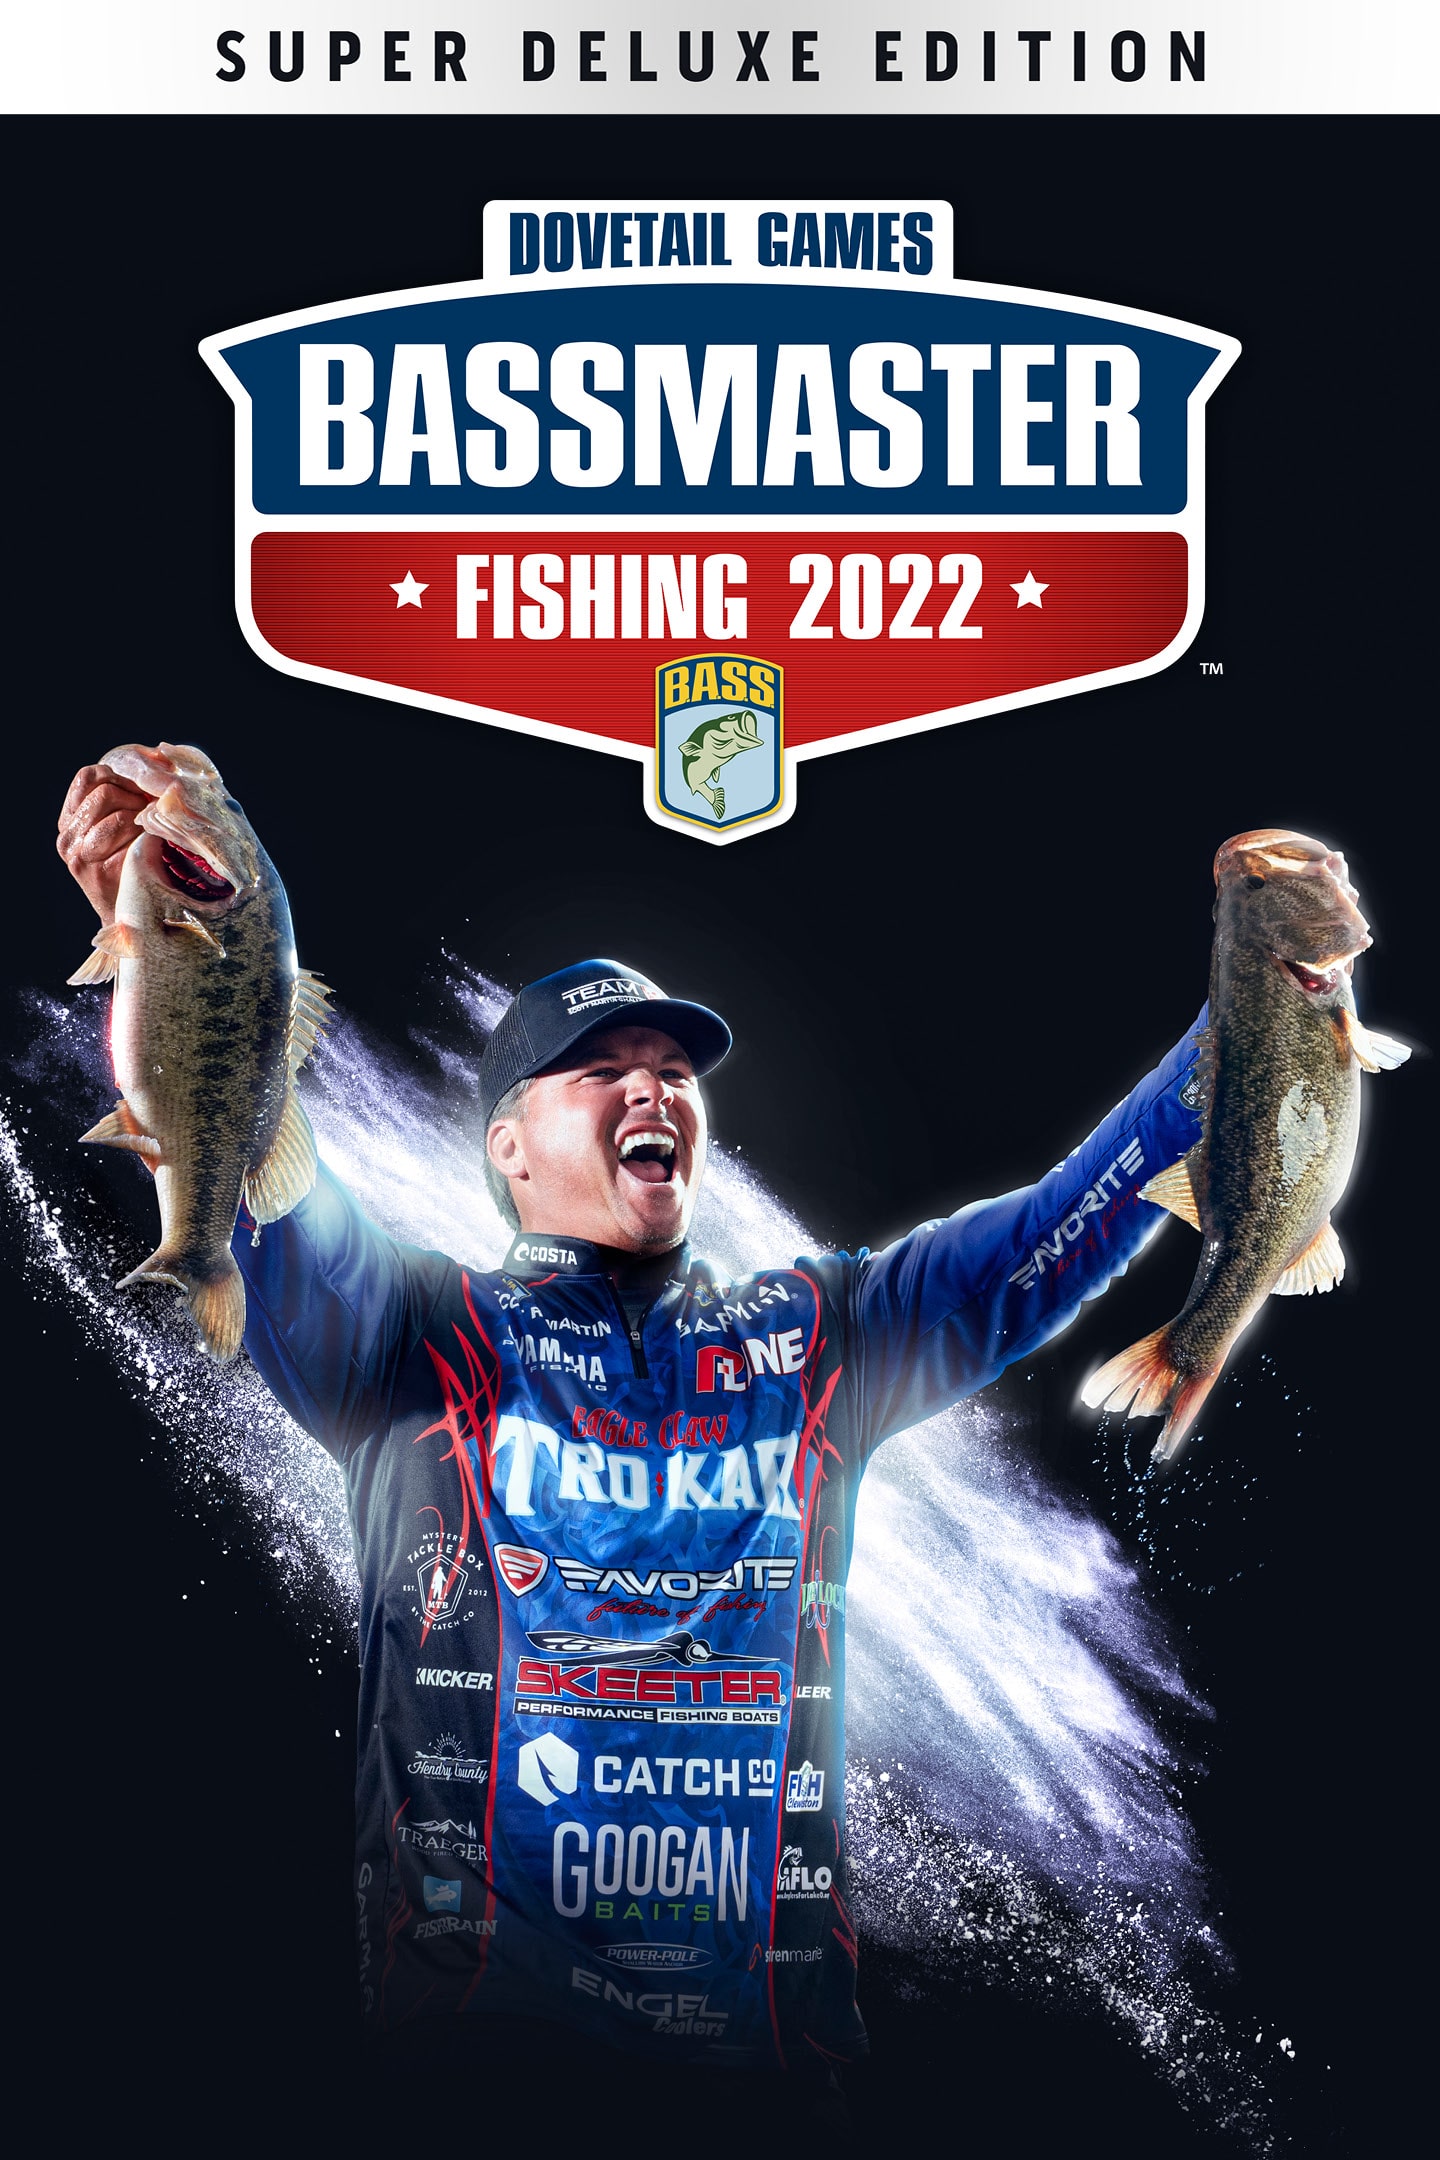 Bassmaster® Fishing: Edition PS5™ and PS4™ Deluxe